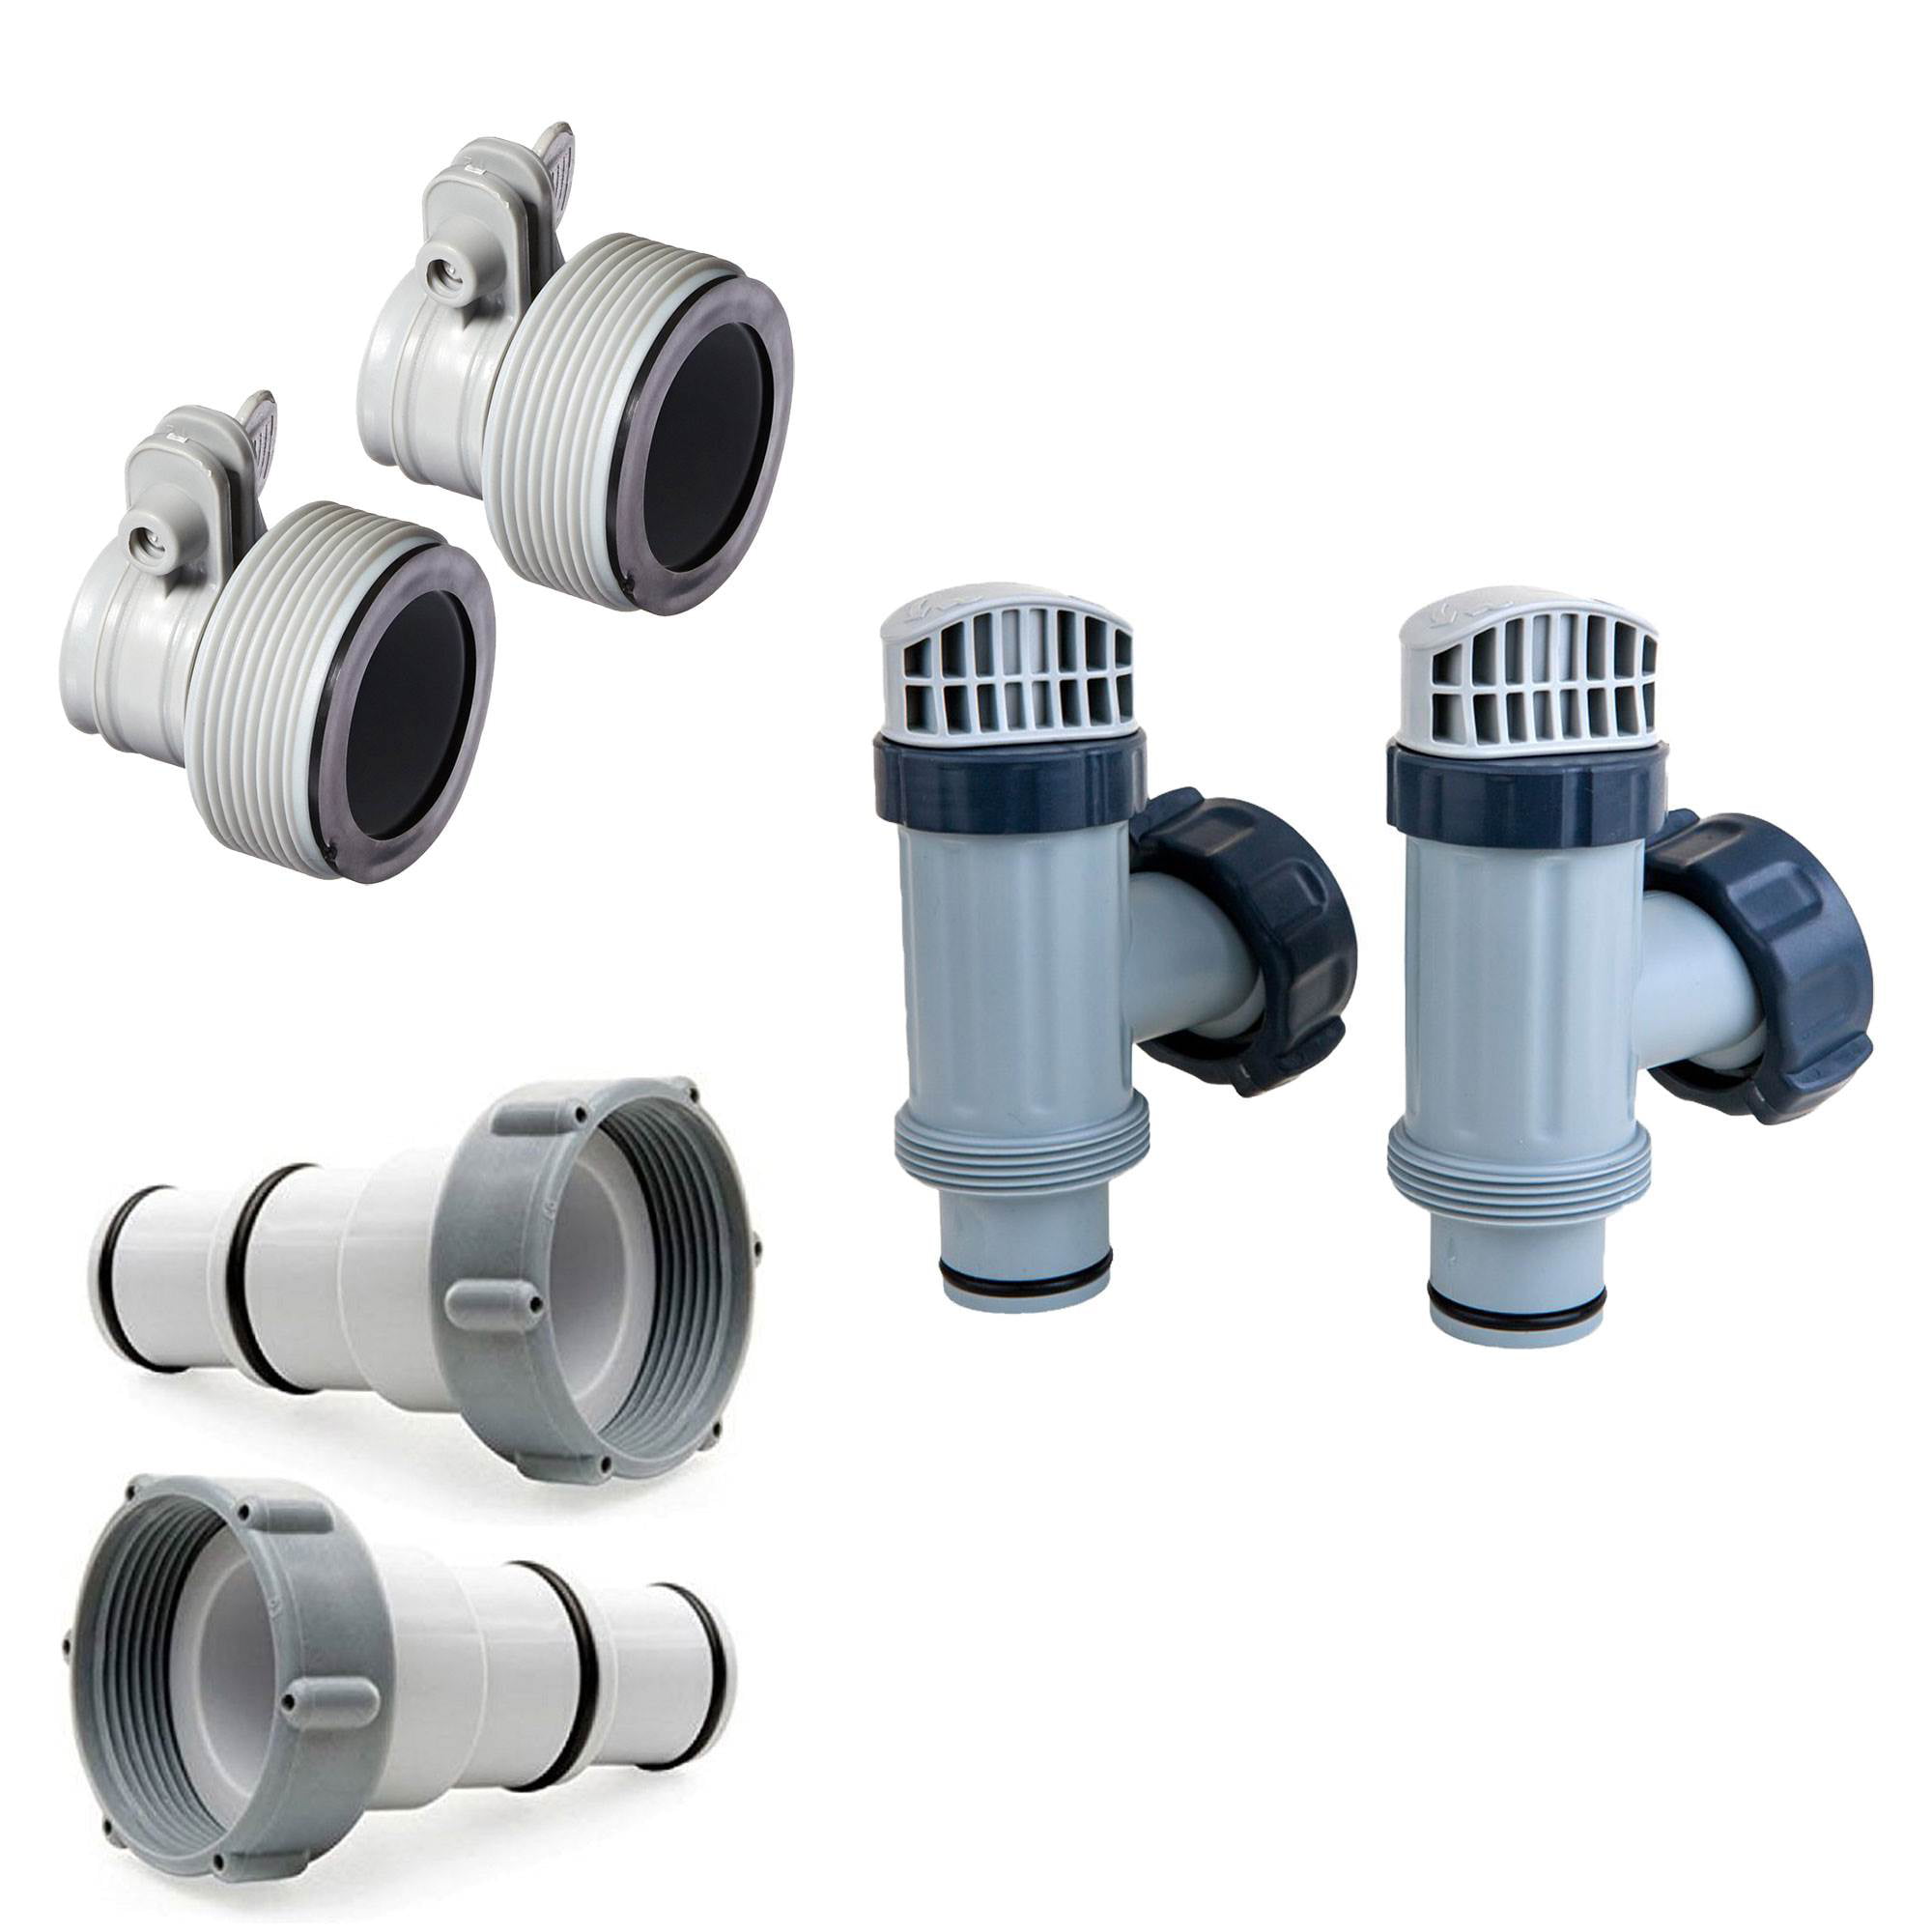 Intex Hose Adapter B w/ Collar 2 Pack 2 Pack Above Ground Plunger Valves 